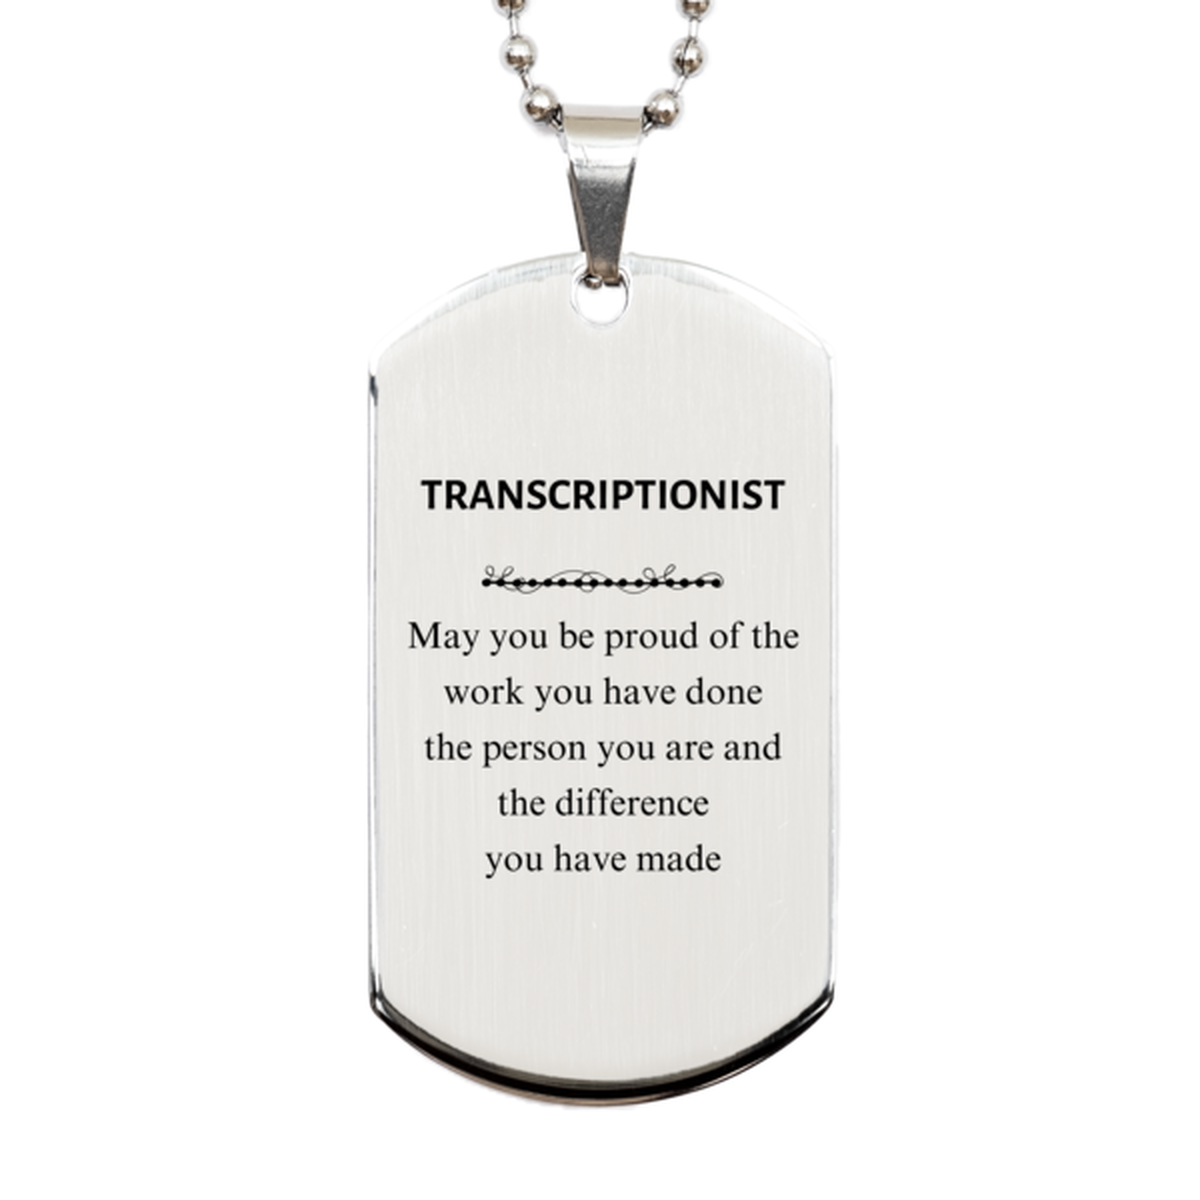 Transcriptionist May you be proud of the work you have done, Retirement Transcriptionist Silver Dog Tag for Colleague Appreciation Gifts Amazing for Transcriptionist